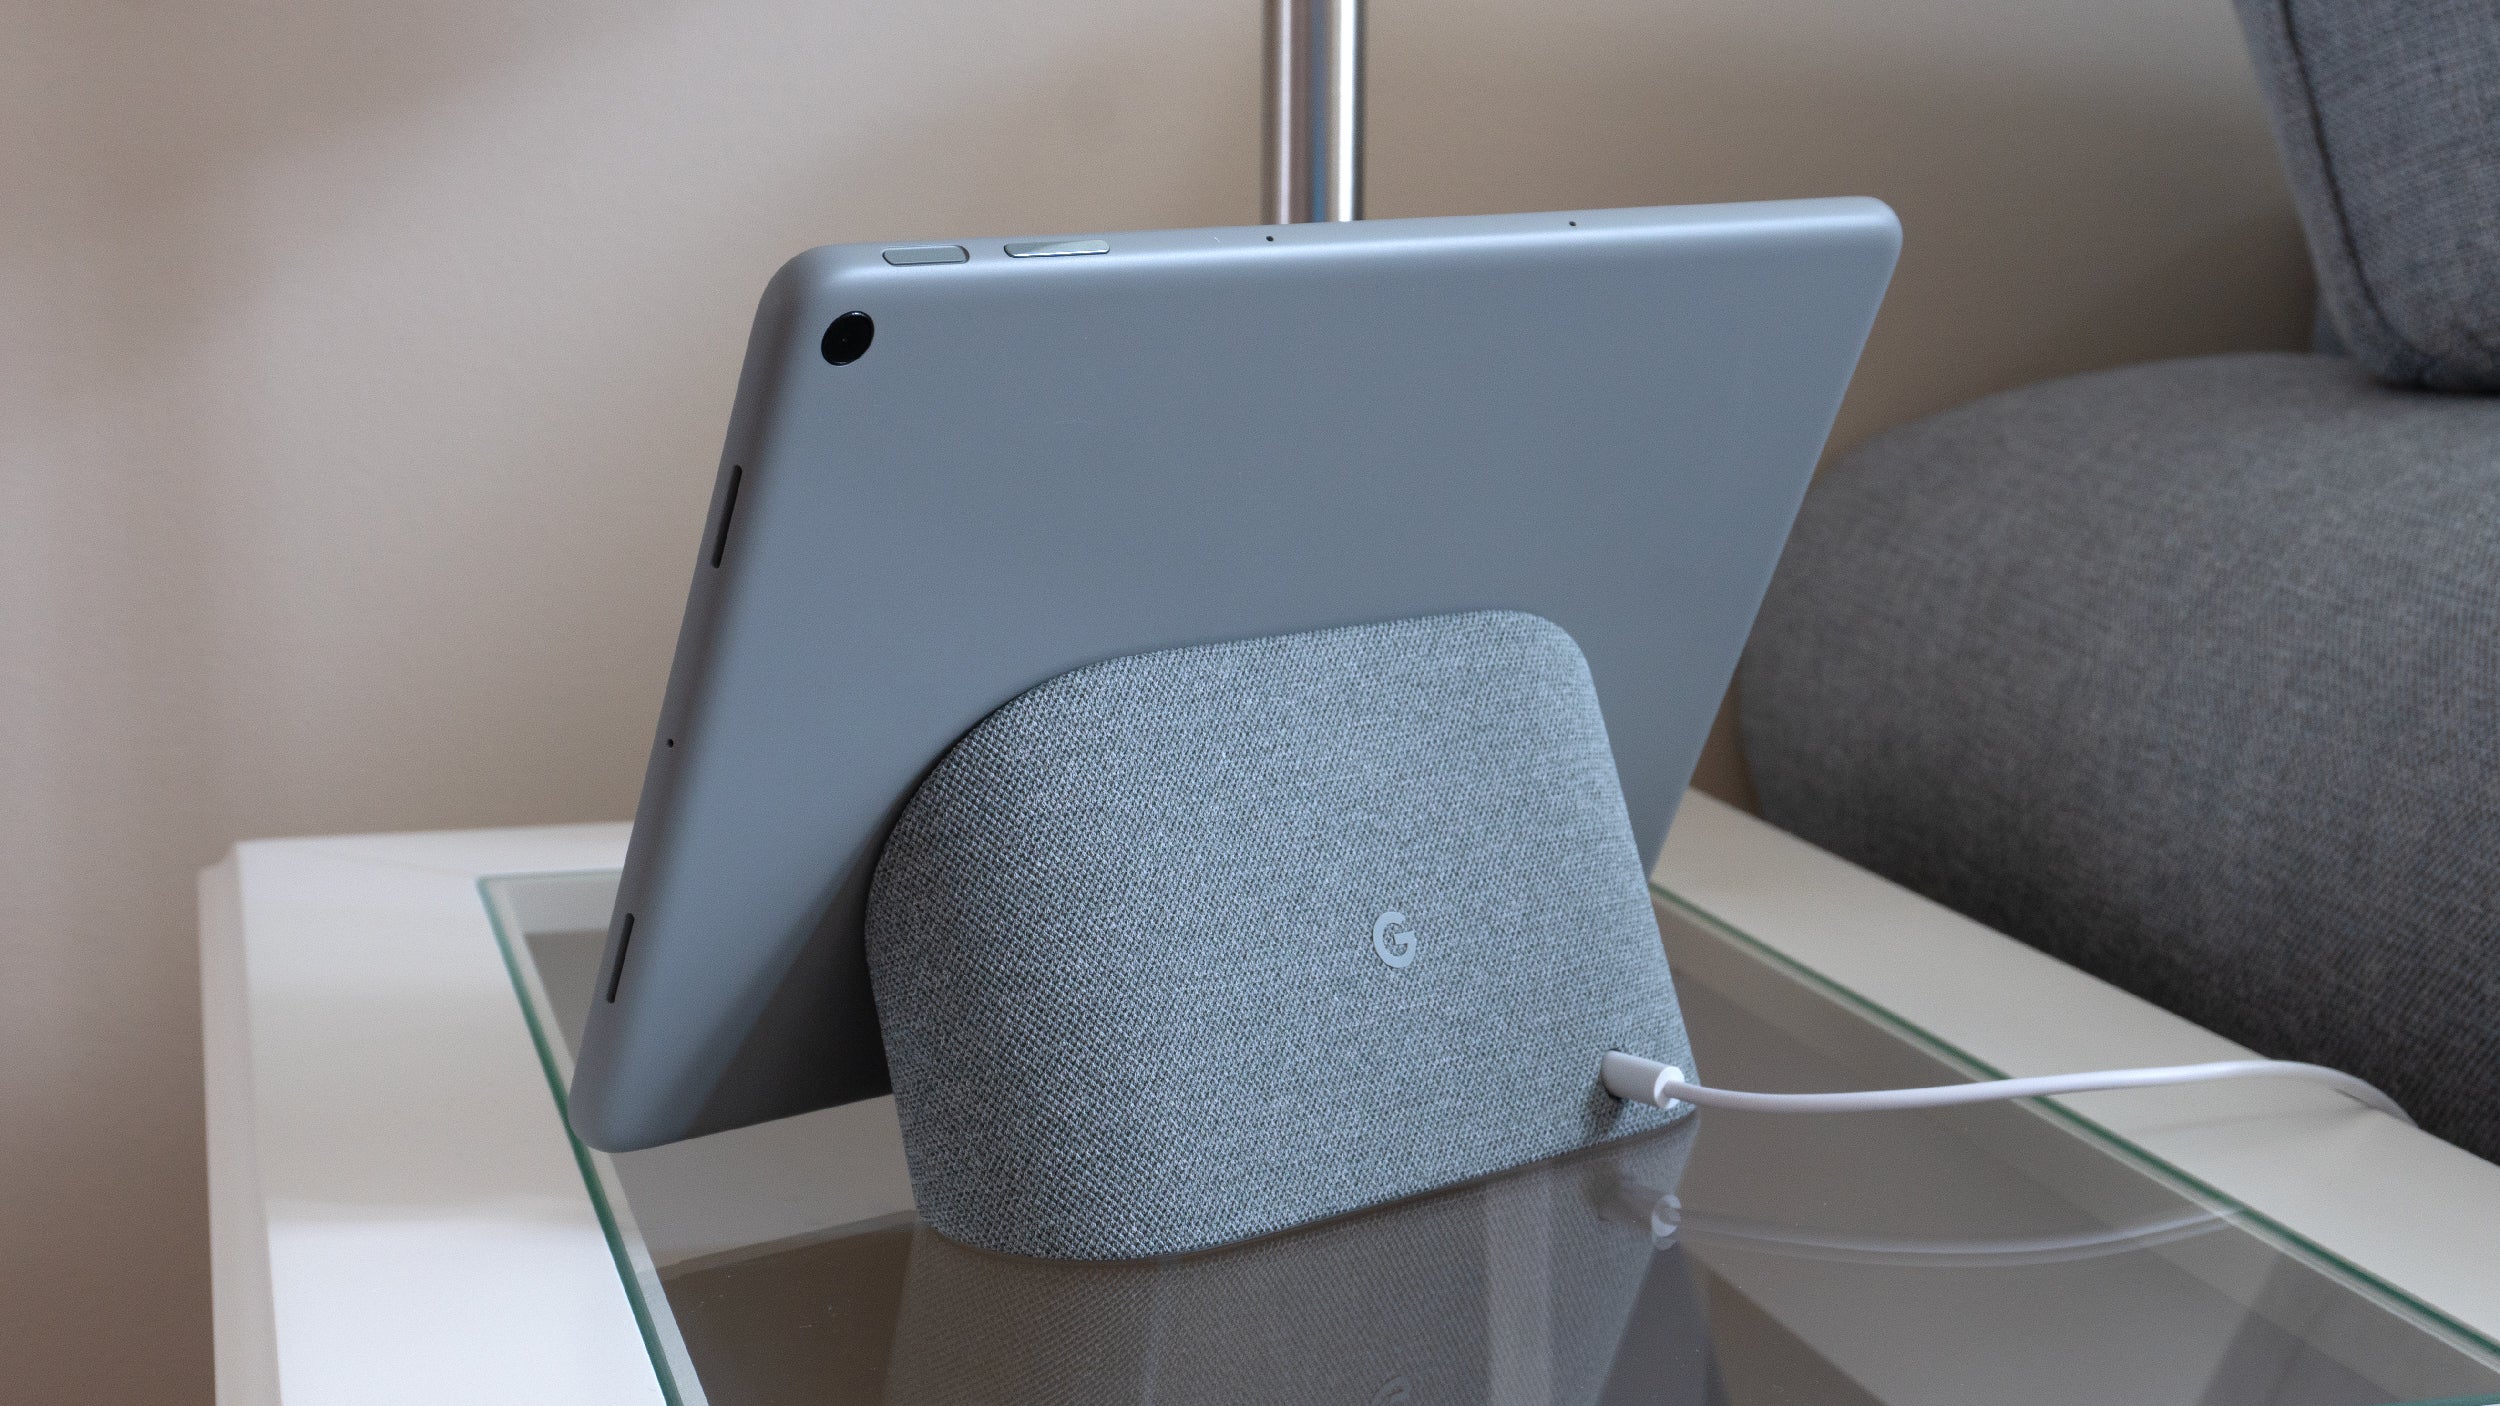 When attached, the Pixel Tablet sits quite low on the dock, which sometimes made it a challenge to perfectly align it when docking. (Photo: Andrew Liszewski | Gizmodo)